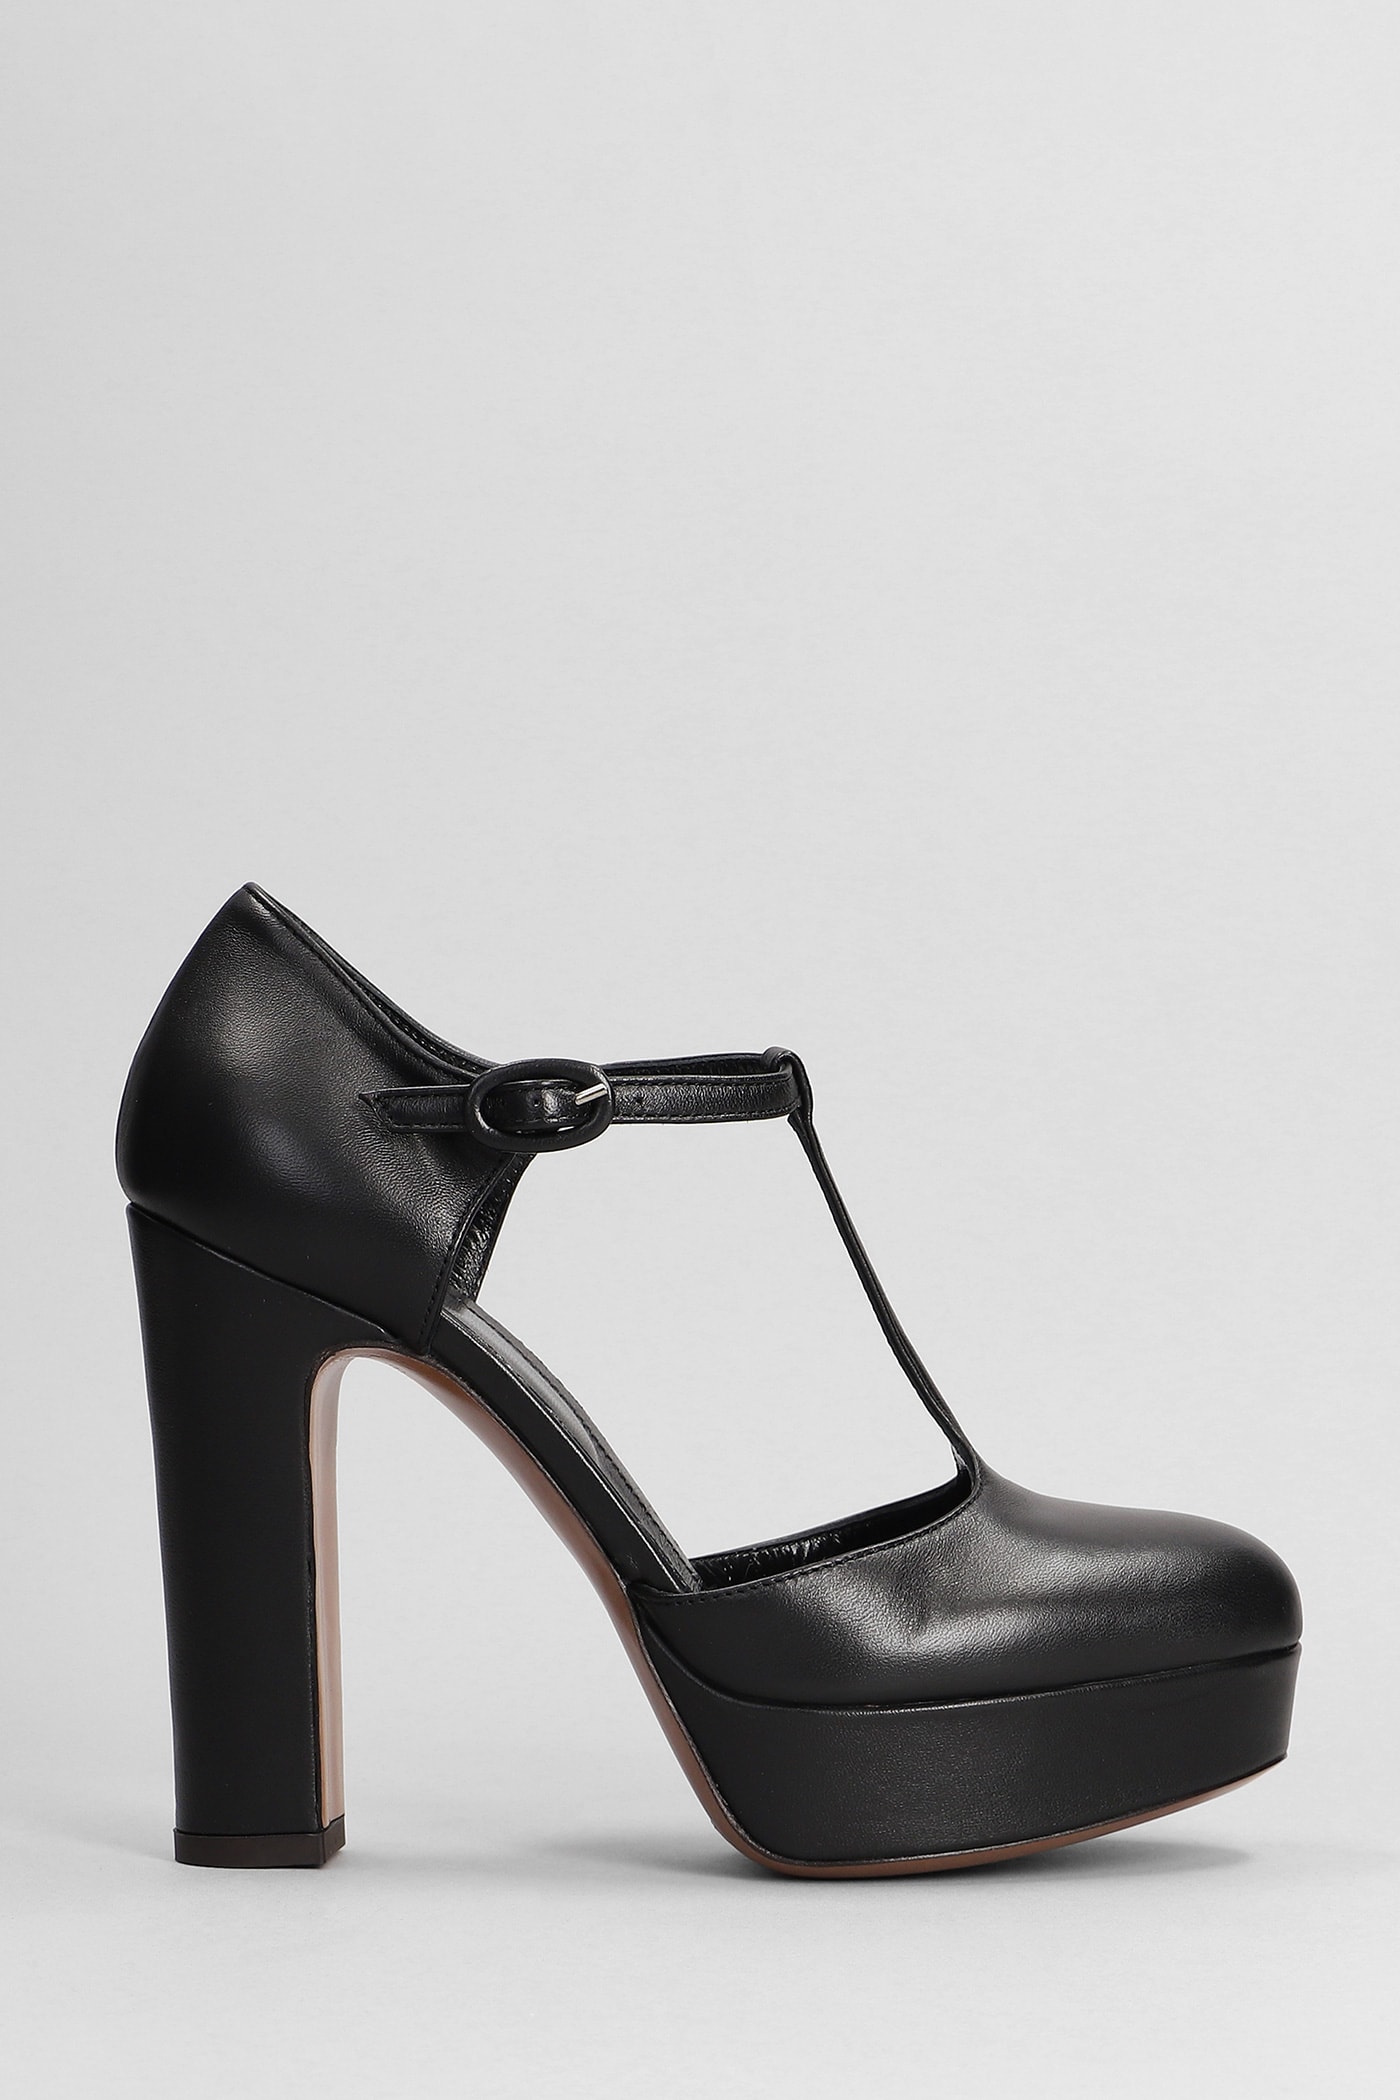 Relac Pumps In Black Leather In Antracite